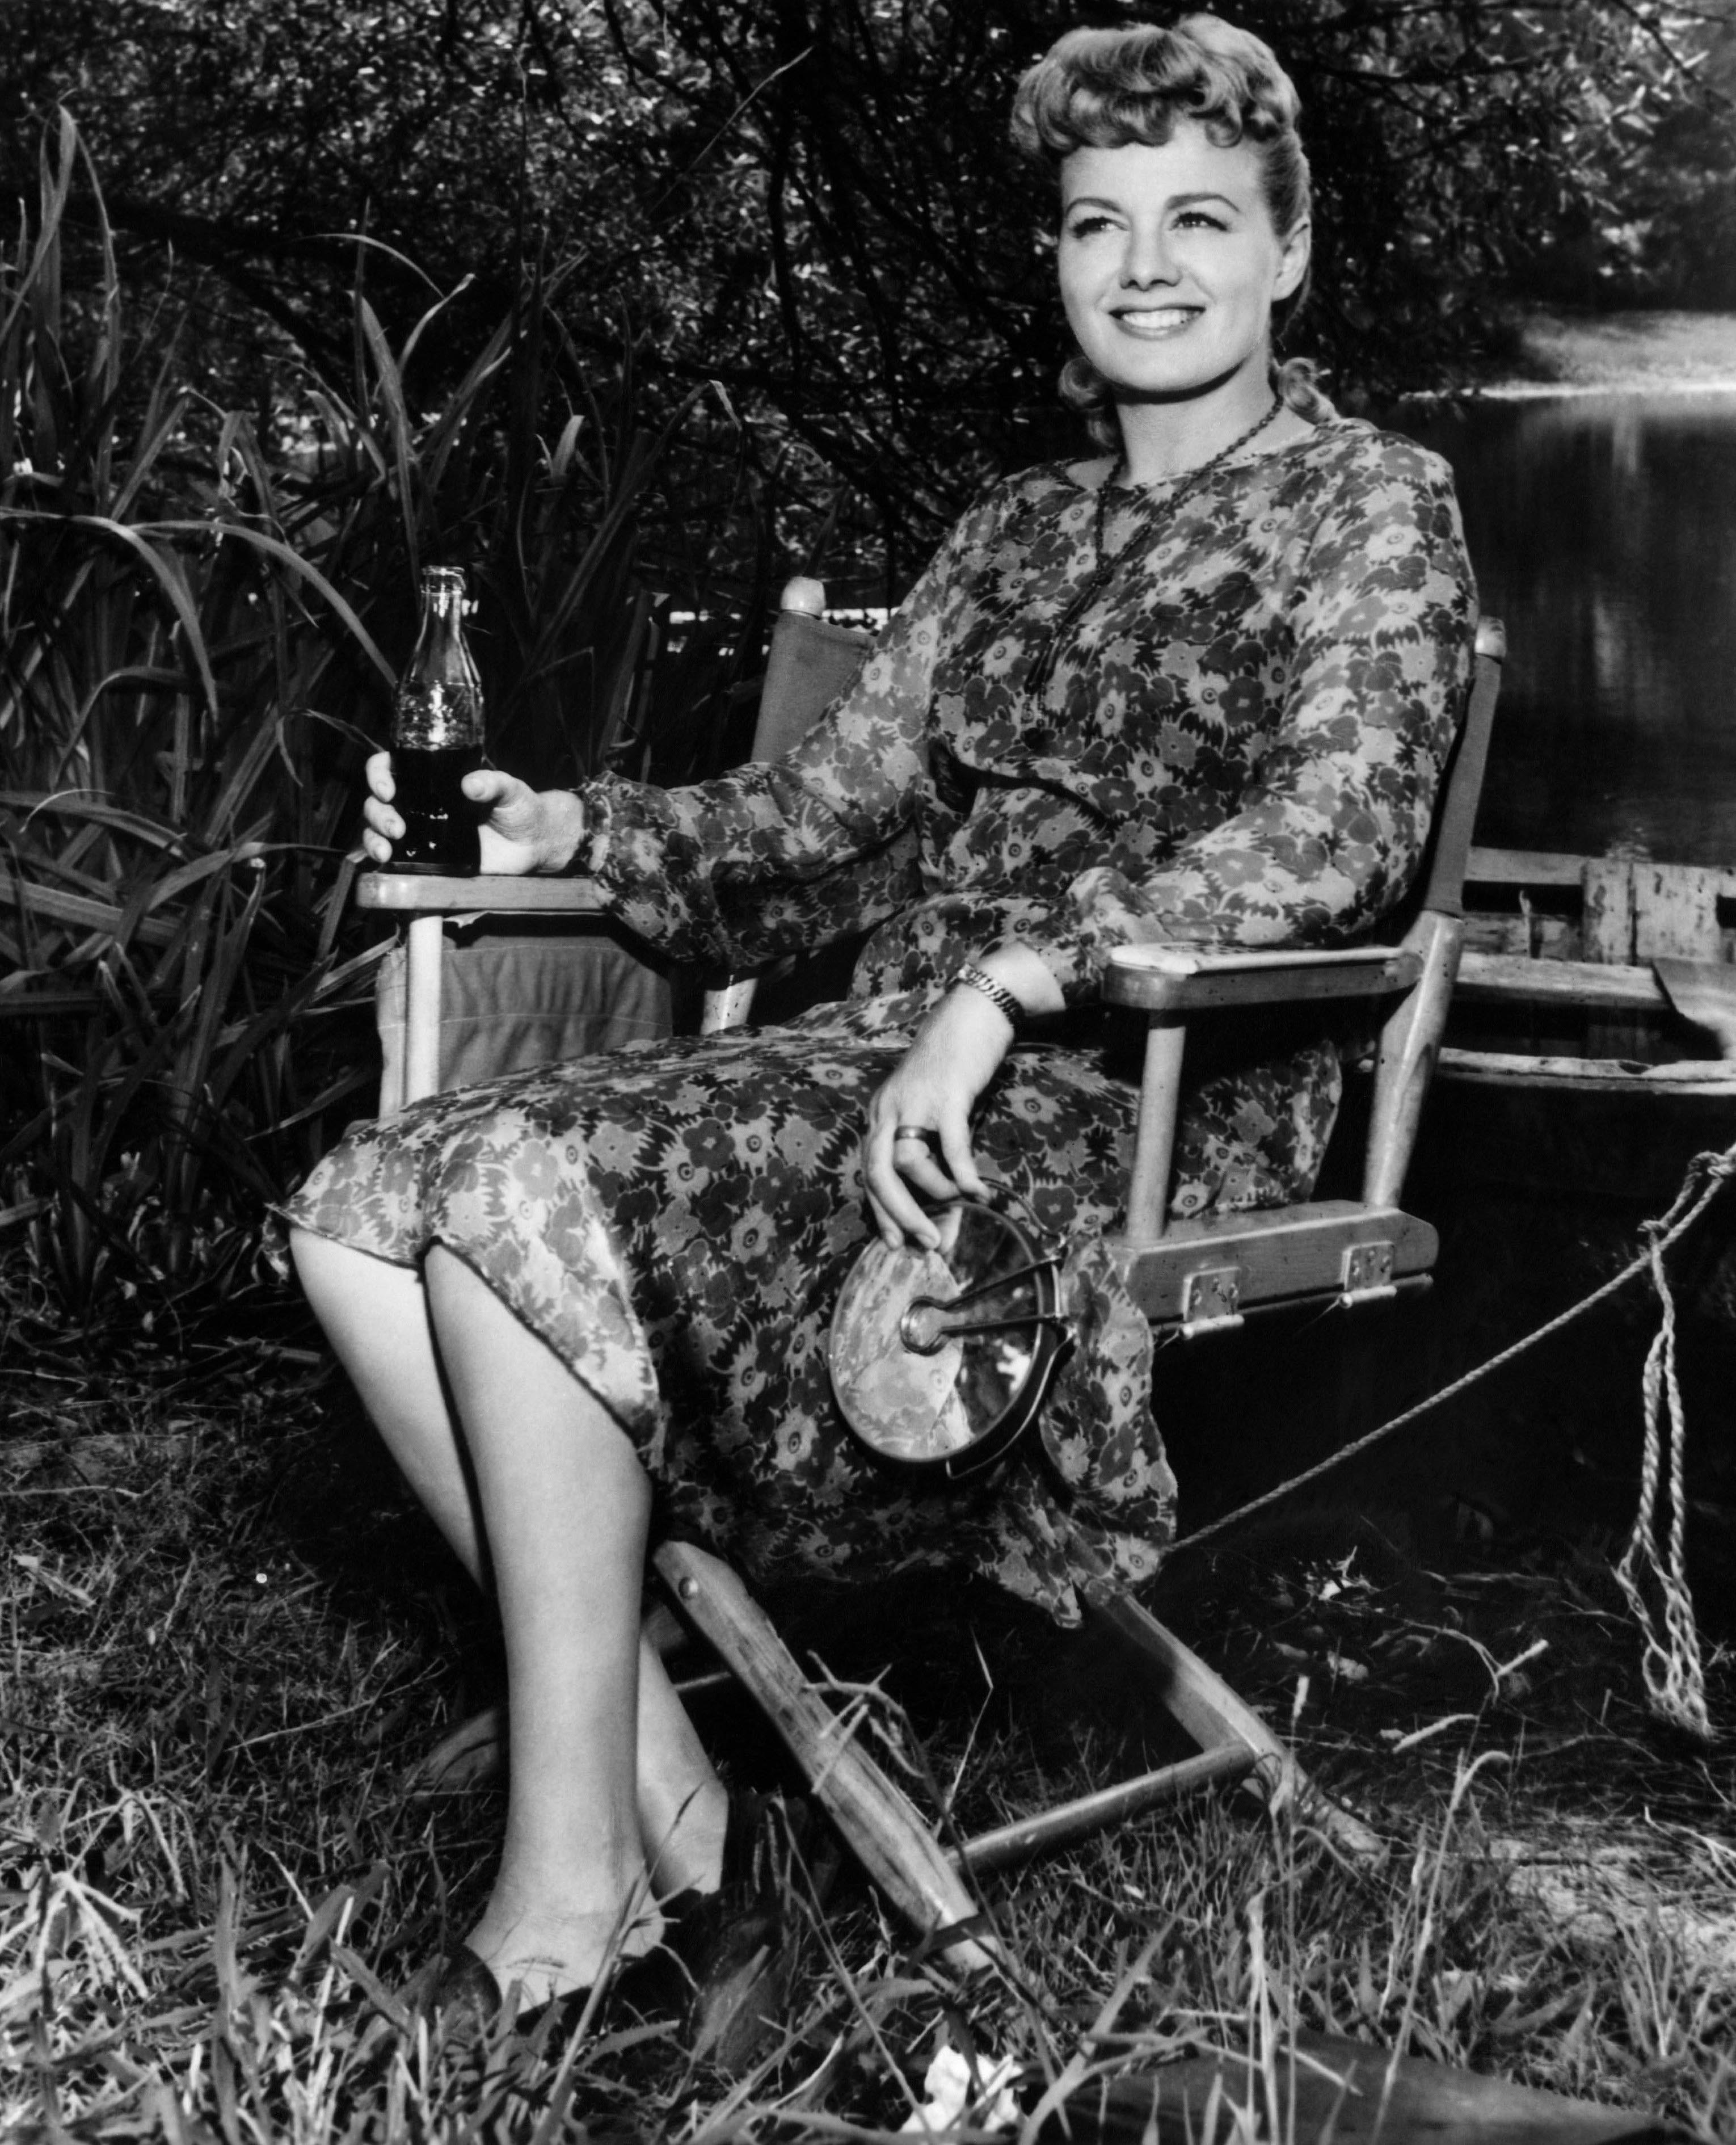 THE NIGHT OF THE HUNTER, Shelley Winters on set 'THE NIGHT OF THE HUNTER' FILM - 1955